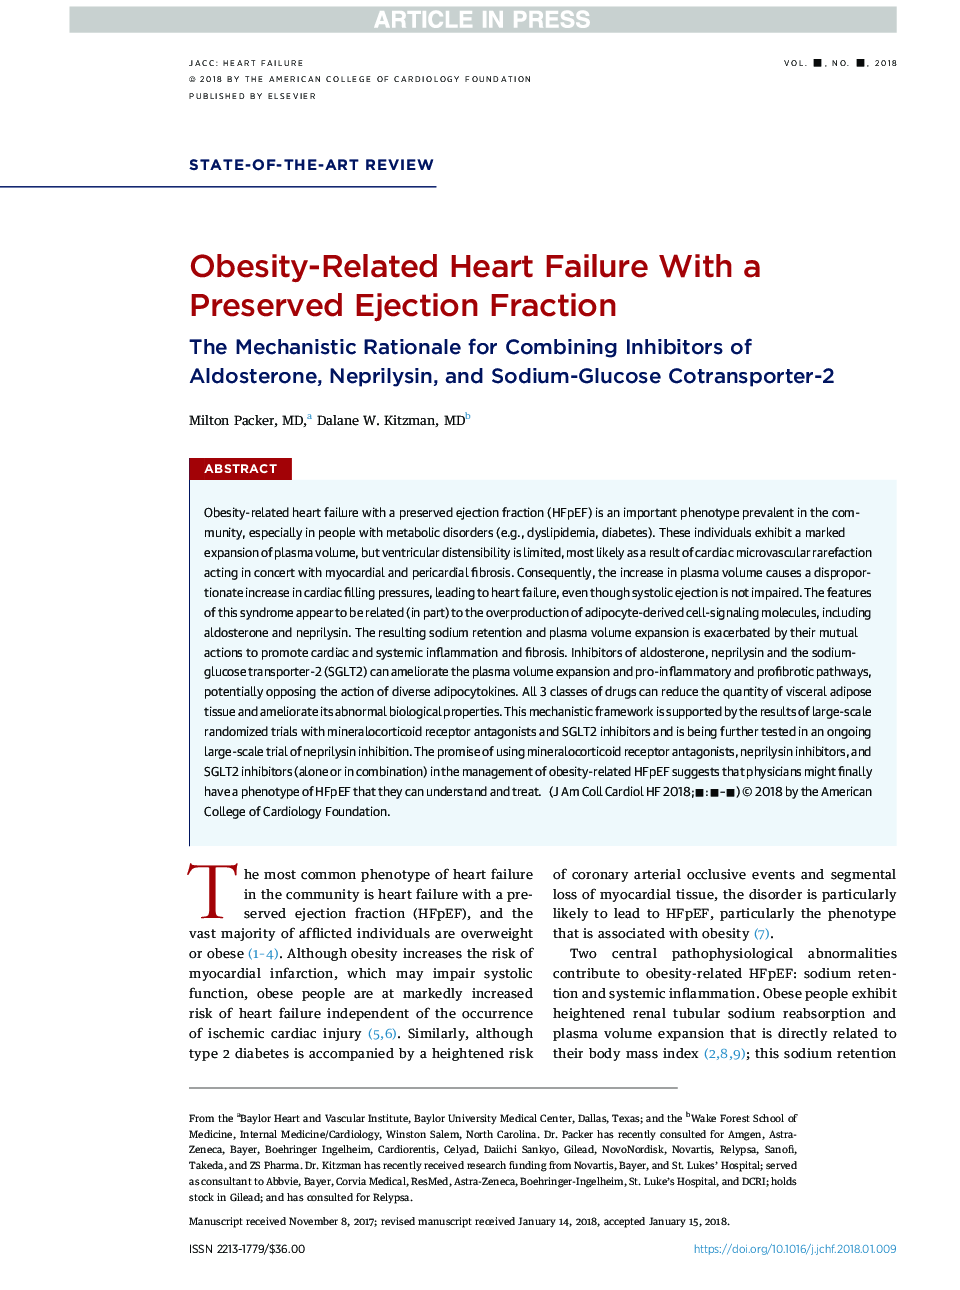 Obesity-Related Heart Failure With a Preserved Ejection Fraction